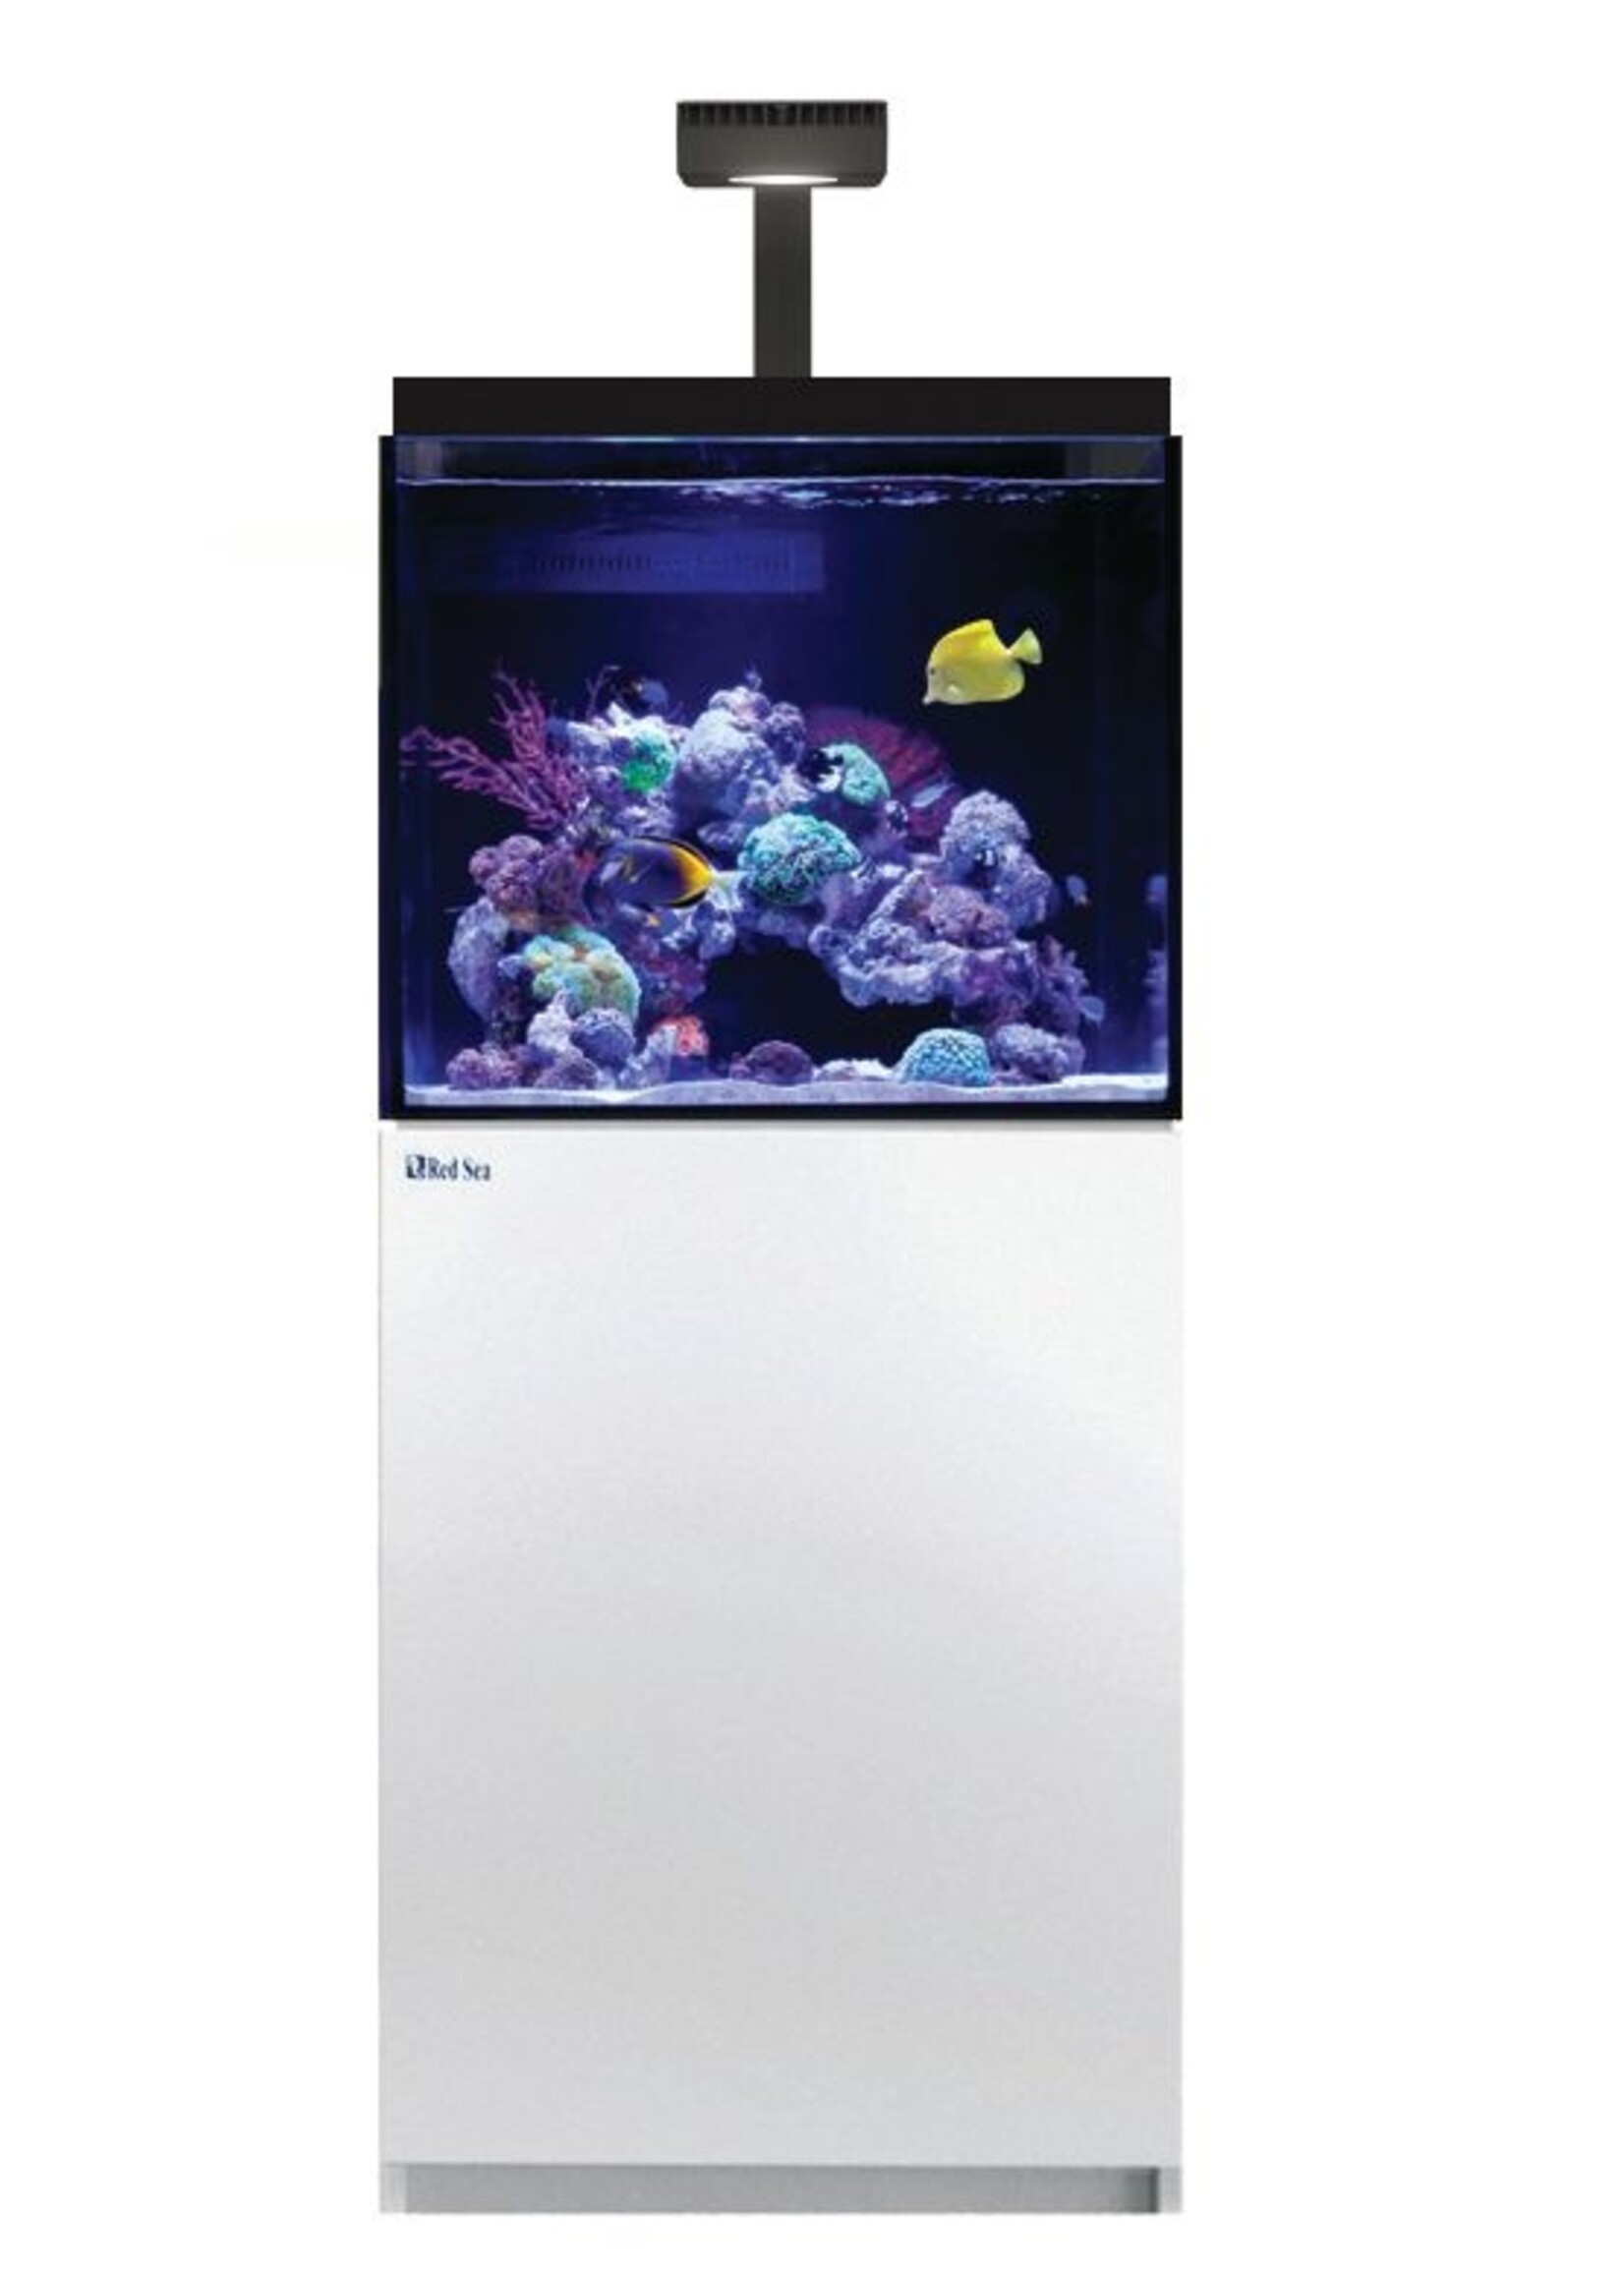 Red Sea MAX E -170 43 G WHITE COMPLETE REEF SYSTEM